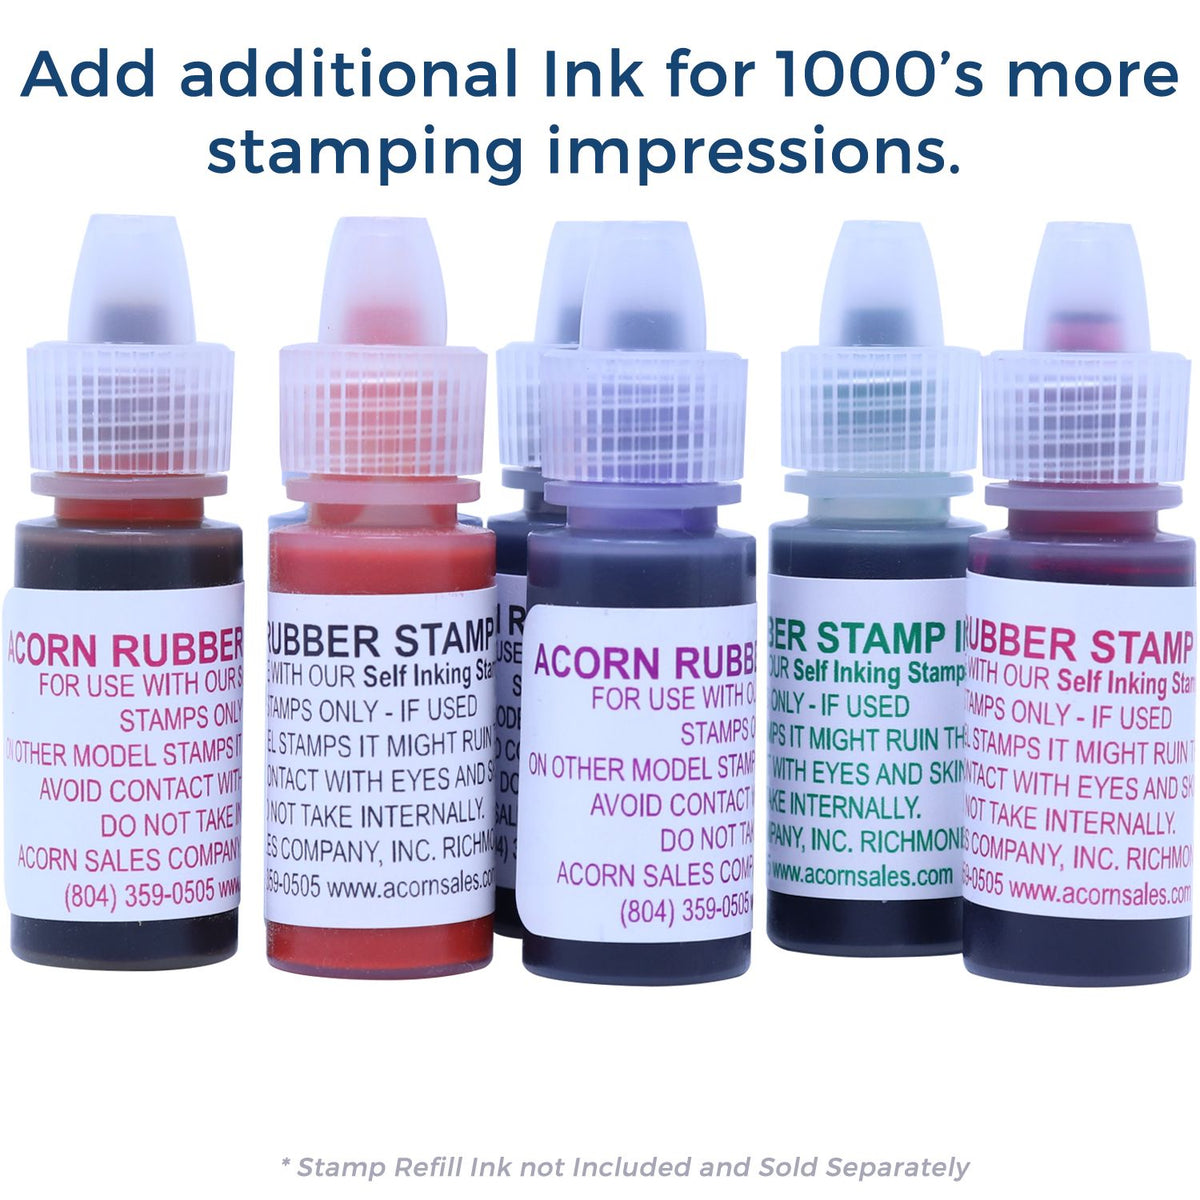 Refill Ink for Self-Inking Round COD Stamp Available